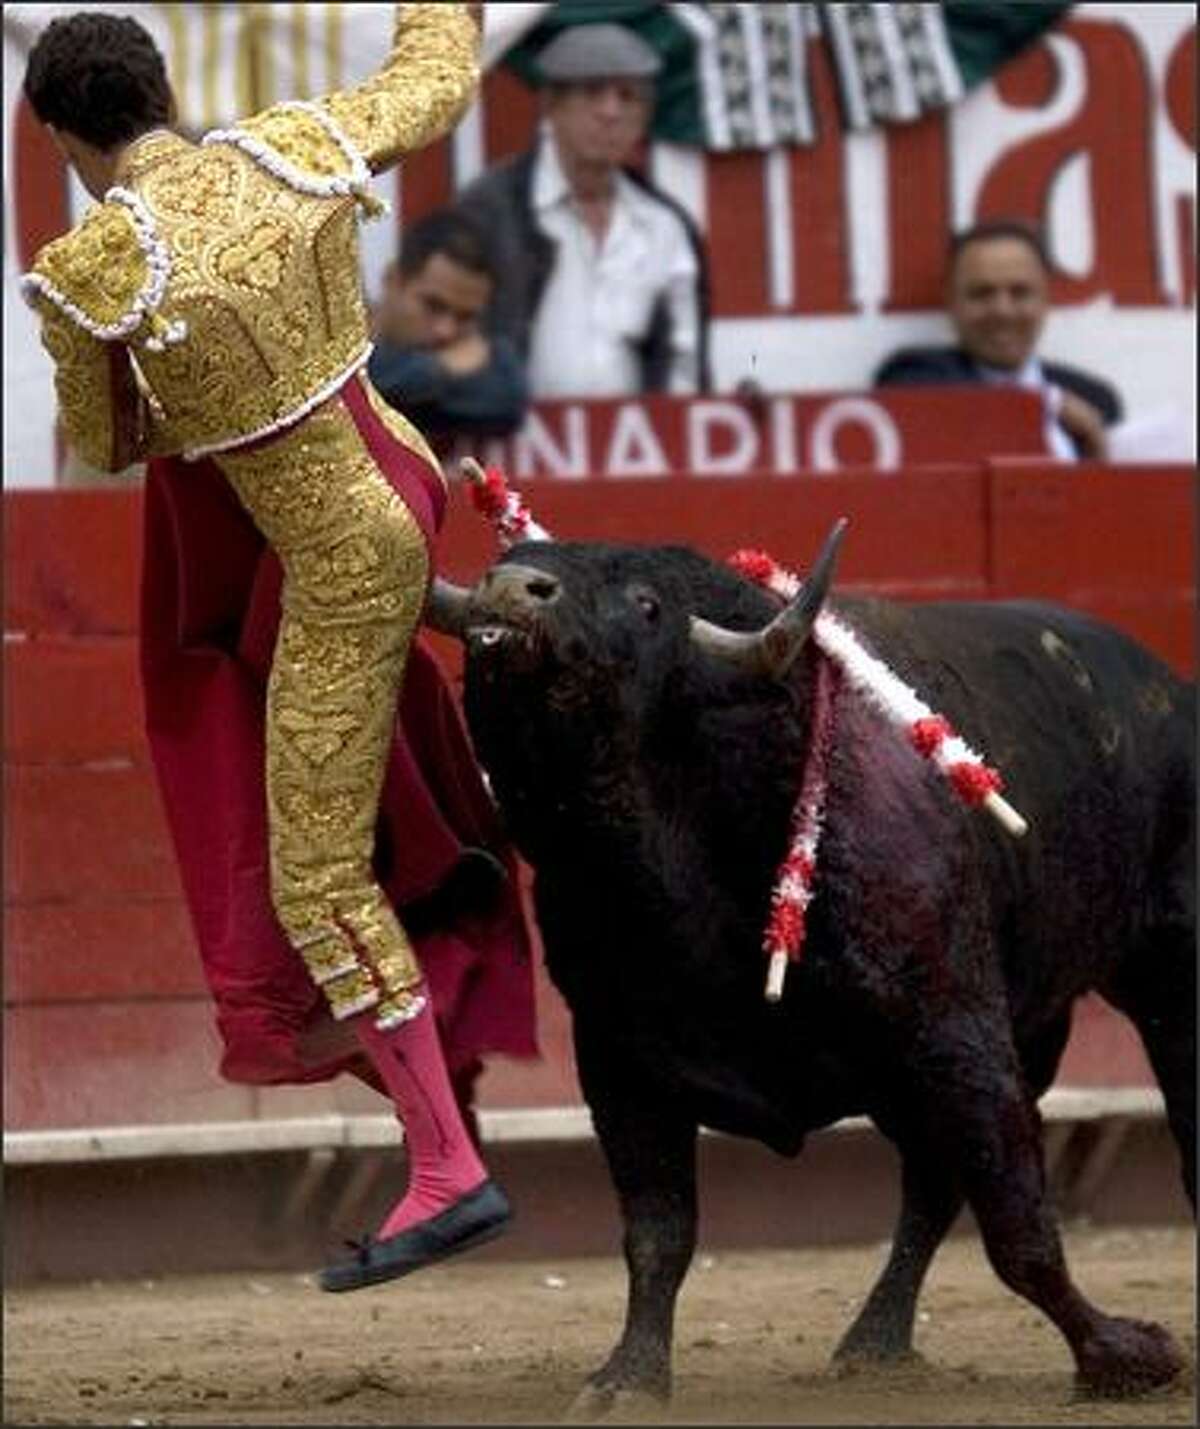 Spanish bullfighter Jose Tomas is butted by the bull during a bullfight in Guadalajara, Mexico. (AP Photo/Guillermo Arias)